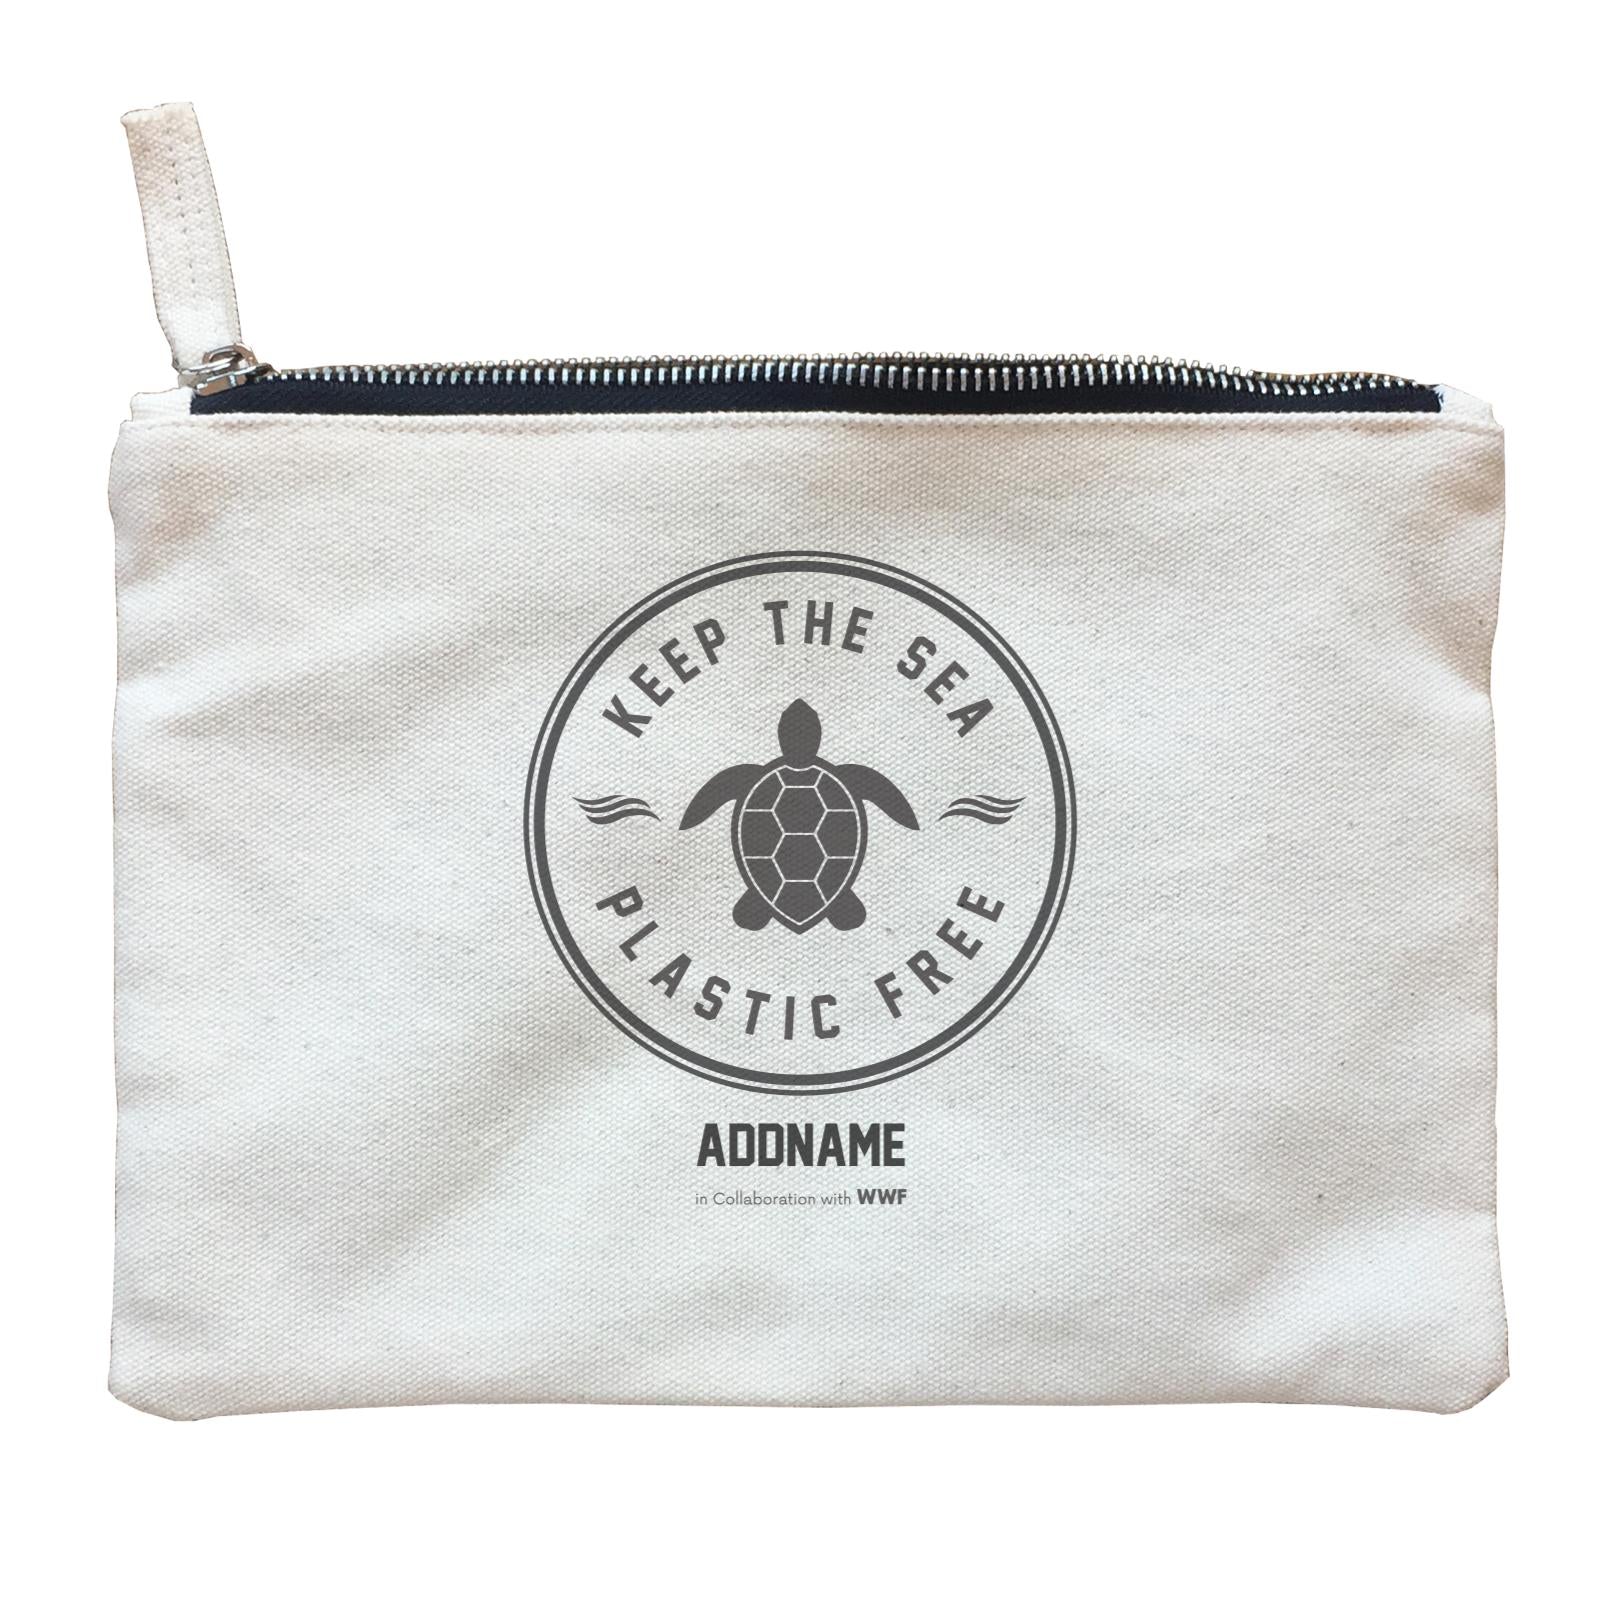 Keep The Sea Plastic Free Turtle Stamp Addname Zipper Pouch